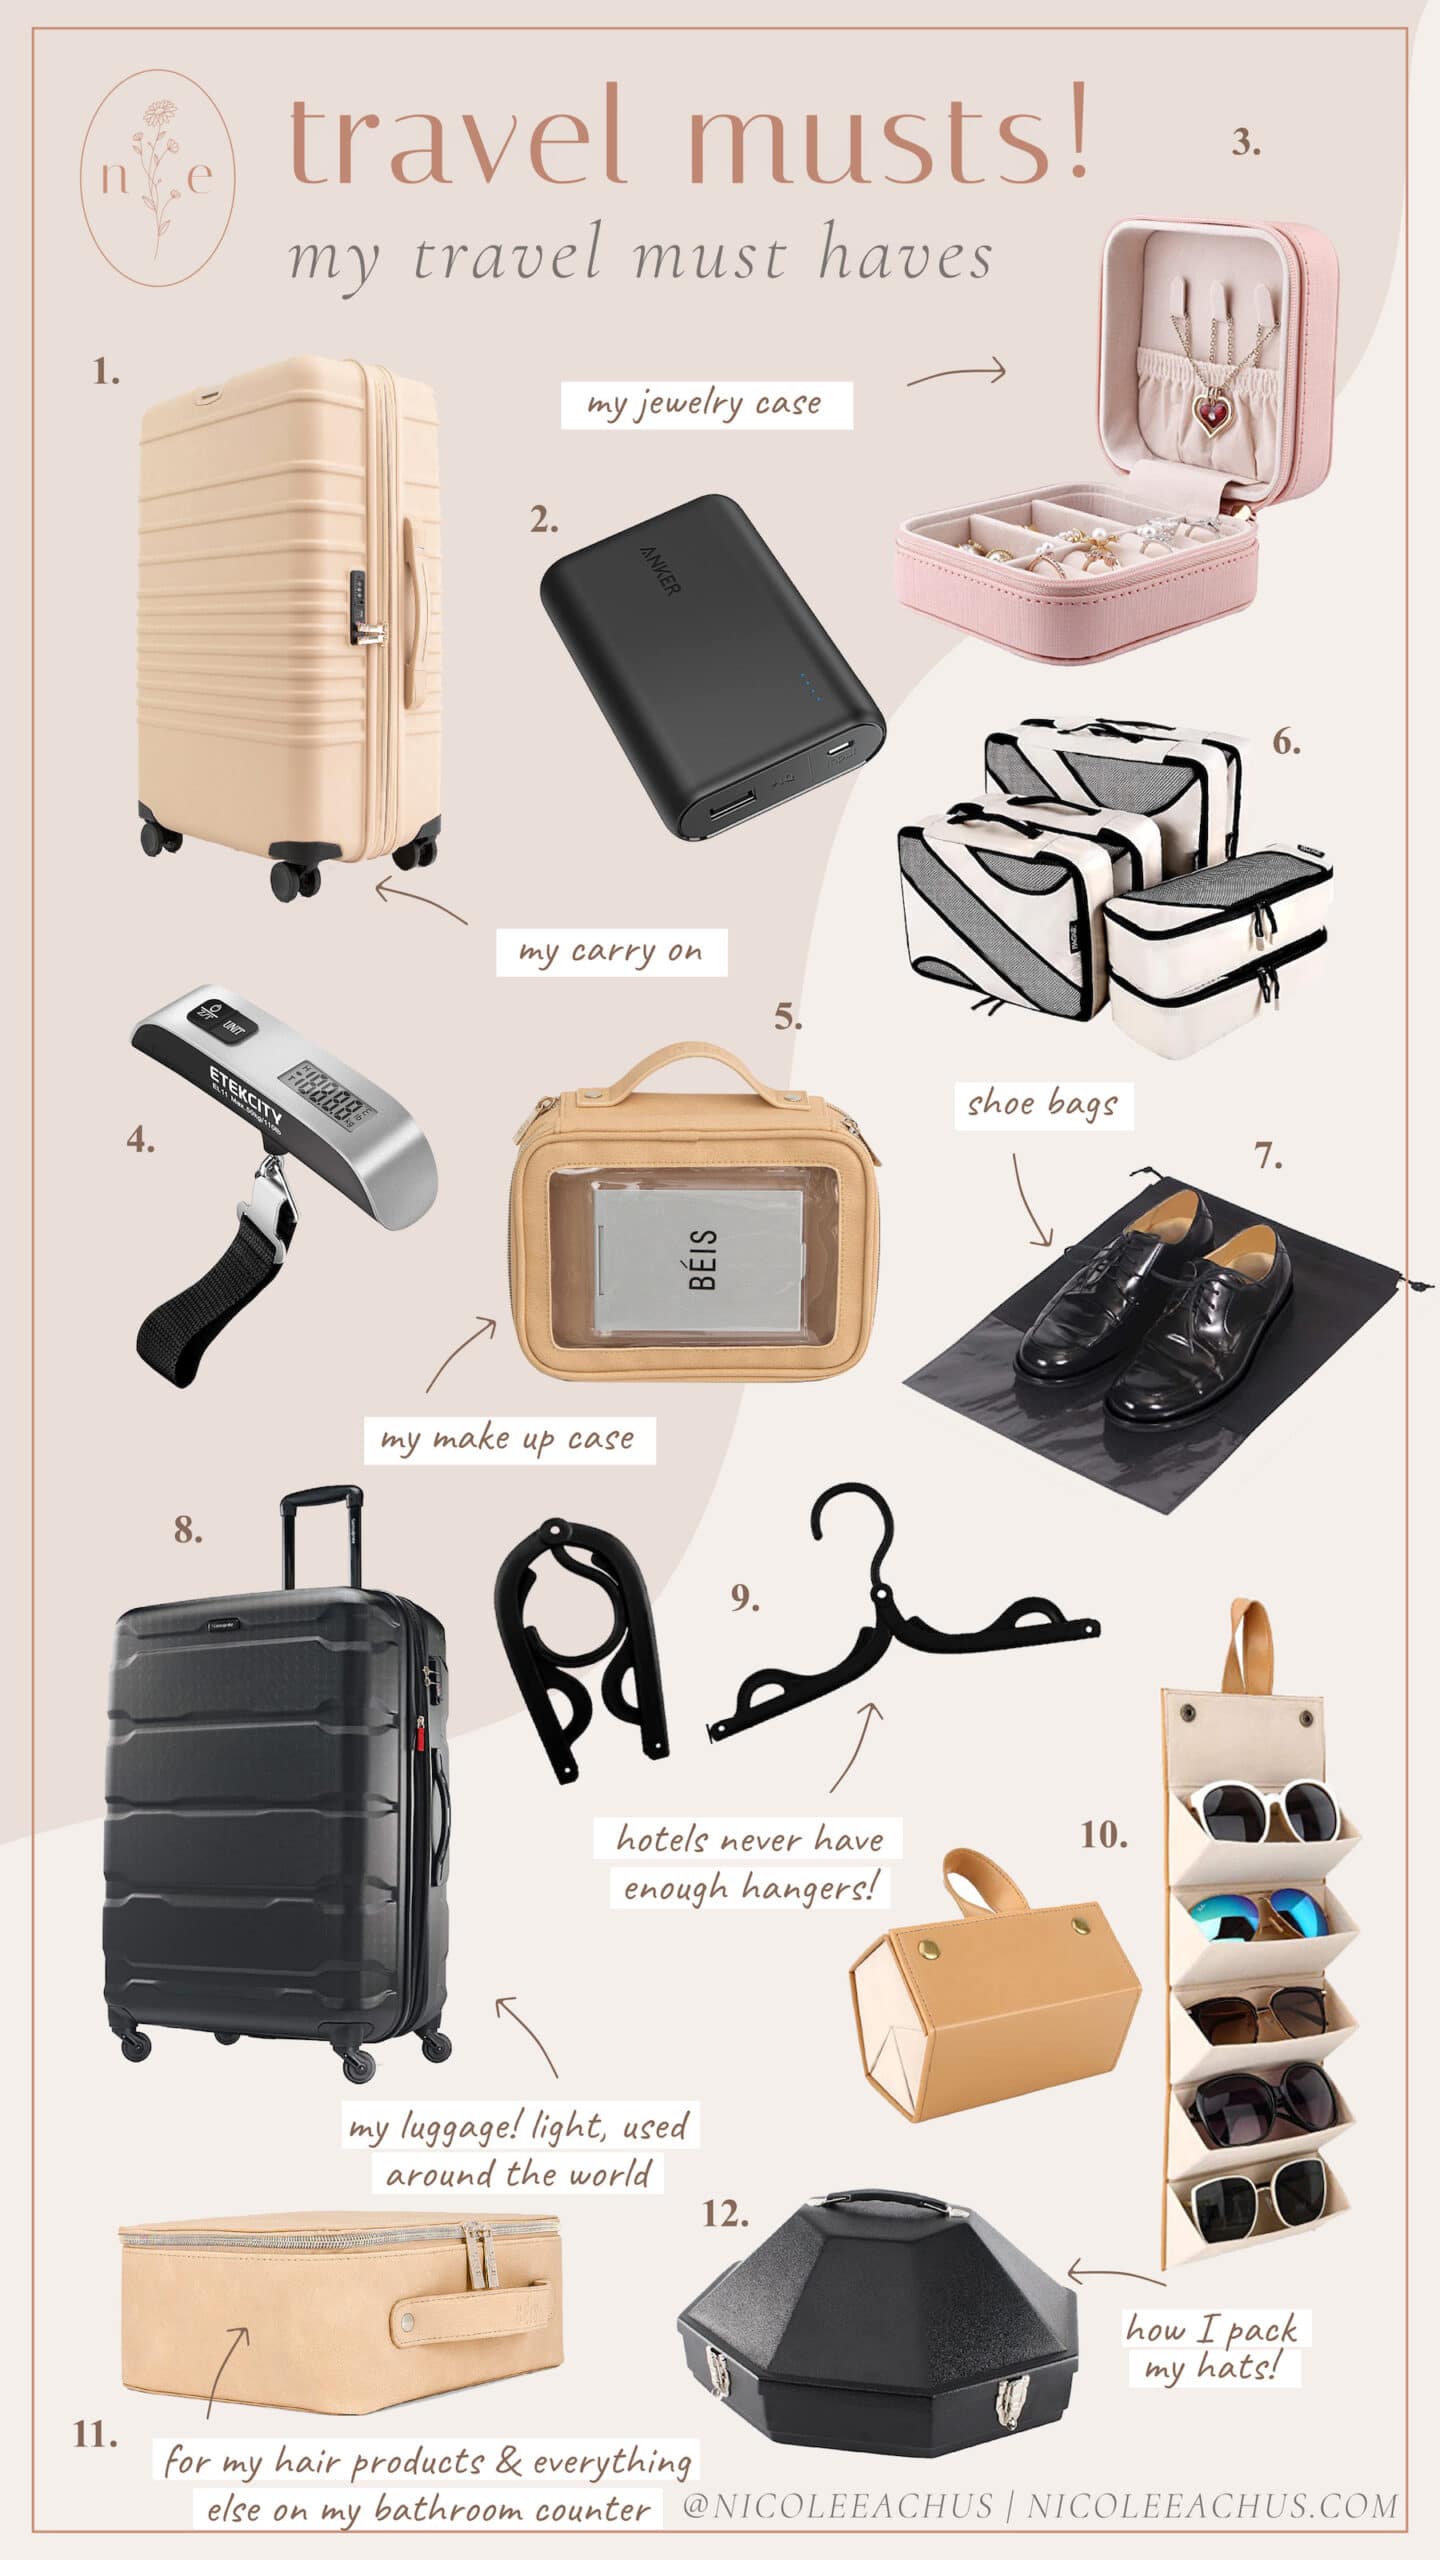 Travel sample must-haves